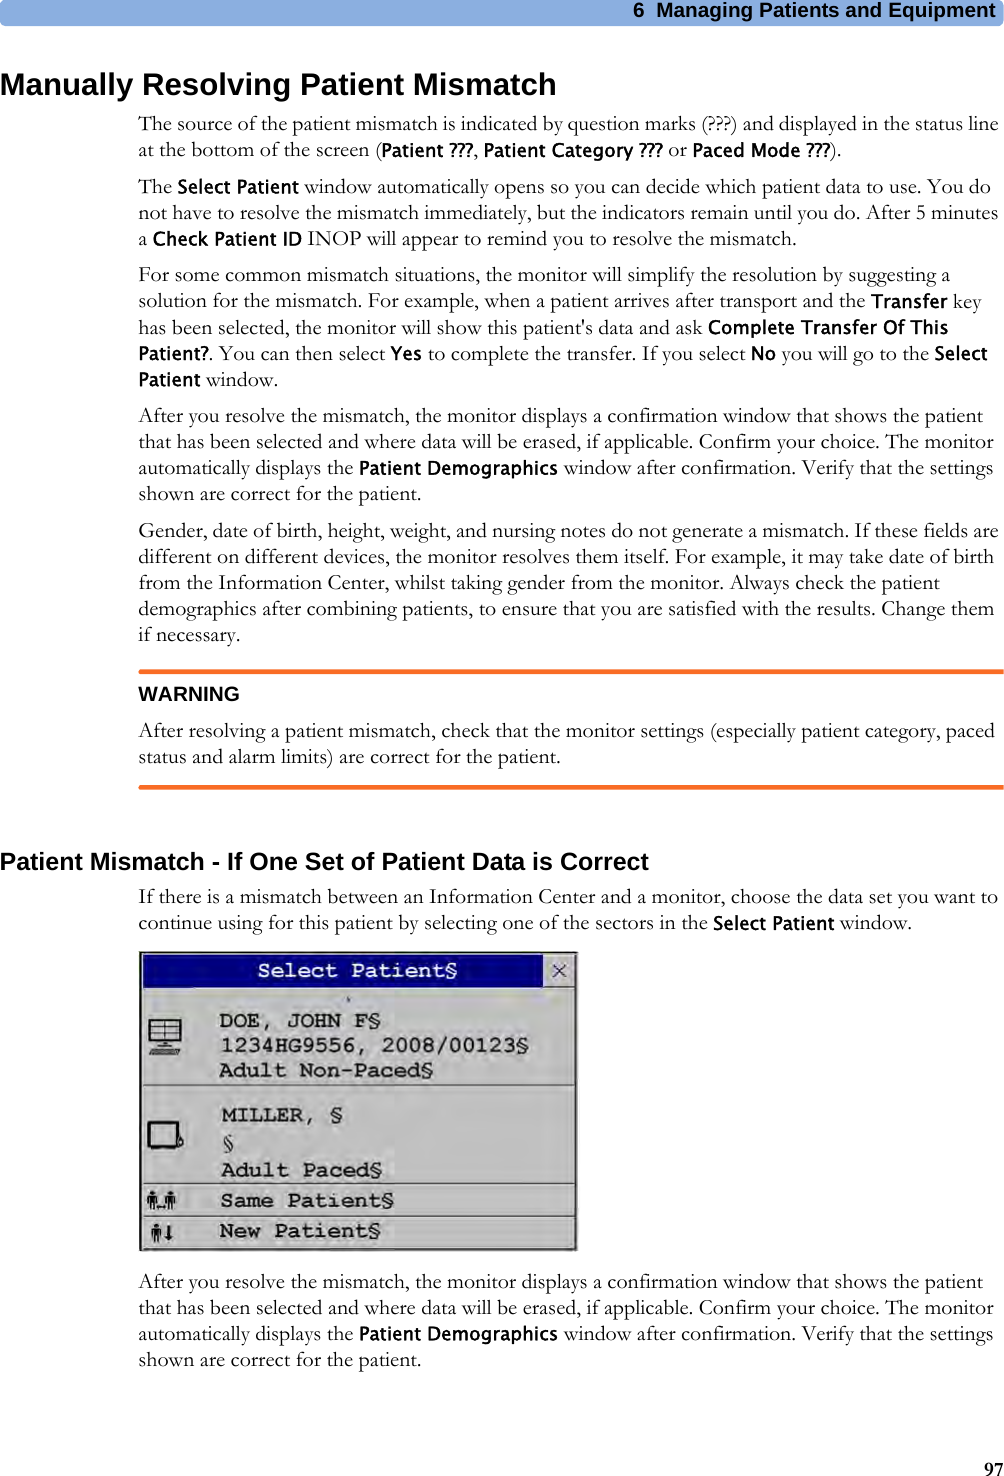 6 Managing Patients and Equipment97Manually Resolving Patient MismatchThe source of the patient mismatch is indicated by question marks (???) and displayed in the status line at the bottom of the screen (Patient ???,Patient Category ??? or Paced Mode ???).The Select Patient window automatically opens so you can decide which patient data to use. You do not have to resolve the mismatch immediately, but the indicators remain until you do. After 5 minutes a Check Patient ID INOP will appear to remind you to resolve the mismatch.For some common mismatch situations, the monitor will simplify the resolution by suggesting a solution for the mismatch. For example, when a patient arrives after transport and the Transfer key has been selected, the monitor will show this patient&apos;s data and ask Complete Transfer Of This Patient?. You can then select Yes to complete the transfer. If you select No you will go to the Select Patient window.After you resolve the mismatch, the monitor displays a confirmation window that shows the patient that has been selected and where data will be erased, if applicable. Confirm your choice. The monitor automatically displays the Patient Demographics window after confirmation. Verify that the settings shown are correct for the patient.Gender, date of birth, height, weight, and nursing notes do not generate a mismatch. If these fields are different on different devices, the monitor resolves them itself. For example, it may take date of birth from the Information Center, whilst taking gender from the monitor. Always check the patient demographics after combining patients, to ensure that you are satisfied with the results. Change them if necessary.WARNINGAfter resolving a patient mismatch, check that the monitor settings (especially patient category, paced status and alarm limits) are correct for the patient.Patient Mismatch - If One Set of Patient Data is CorrectIf there is a mismatch between an Information Center and a monitor, choose the data set you want to continue using for this patient by selecting one of the sectors in the Select Patient window.After you resolve the mismatch, the monitor displays a confirmation window that shows the patient that has been selected and where data will be erased, if applicable. Confirm your choice. The monitor automatically displays the Patient Demographics window after confirmation. Verify that the settings shown are correct for the patient.